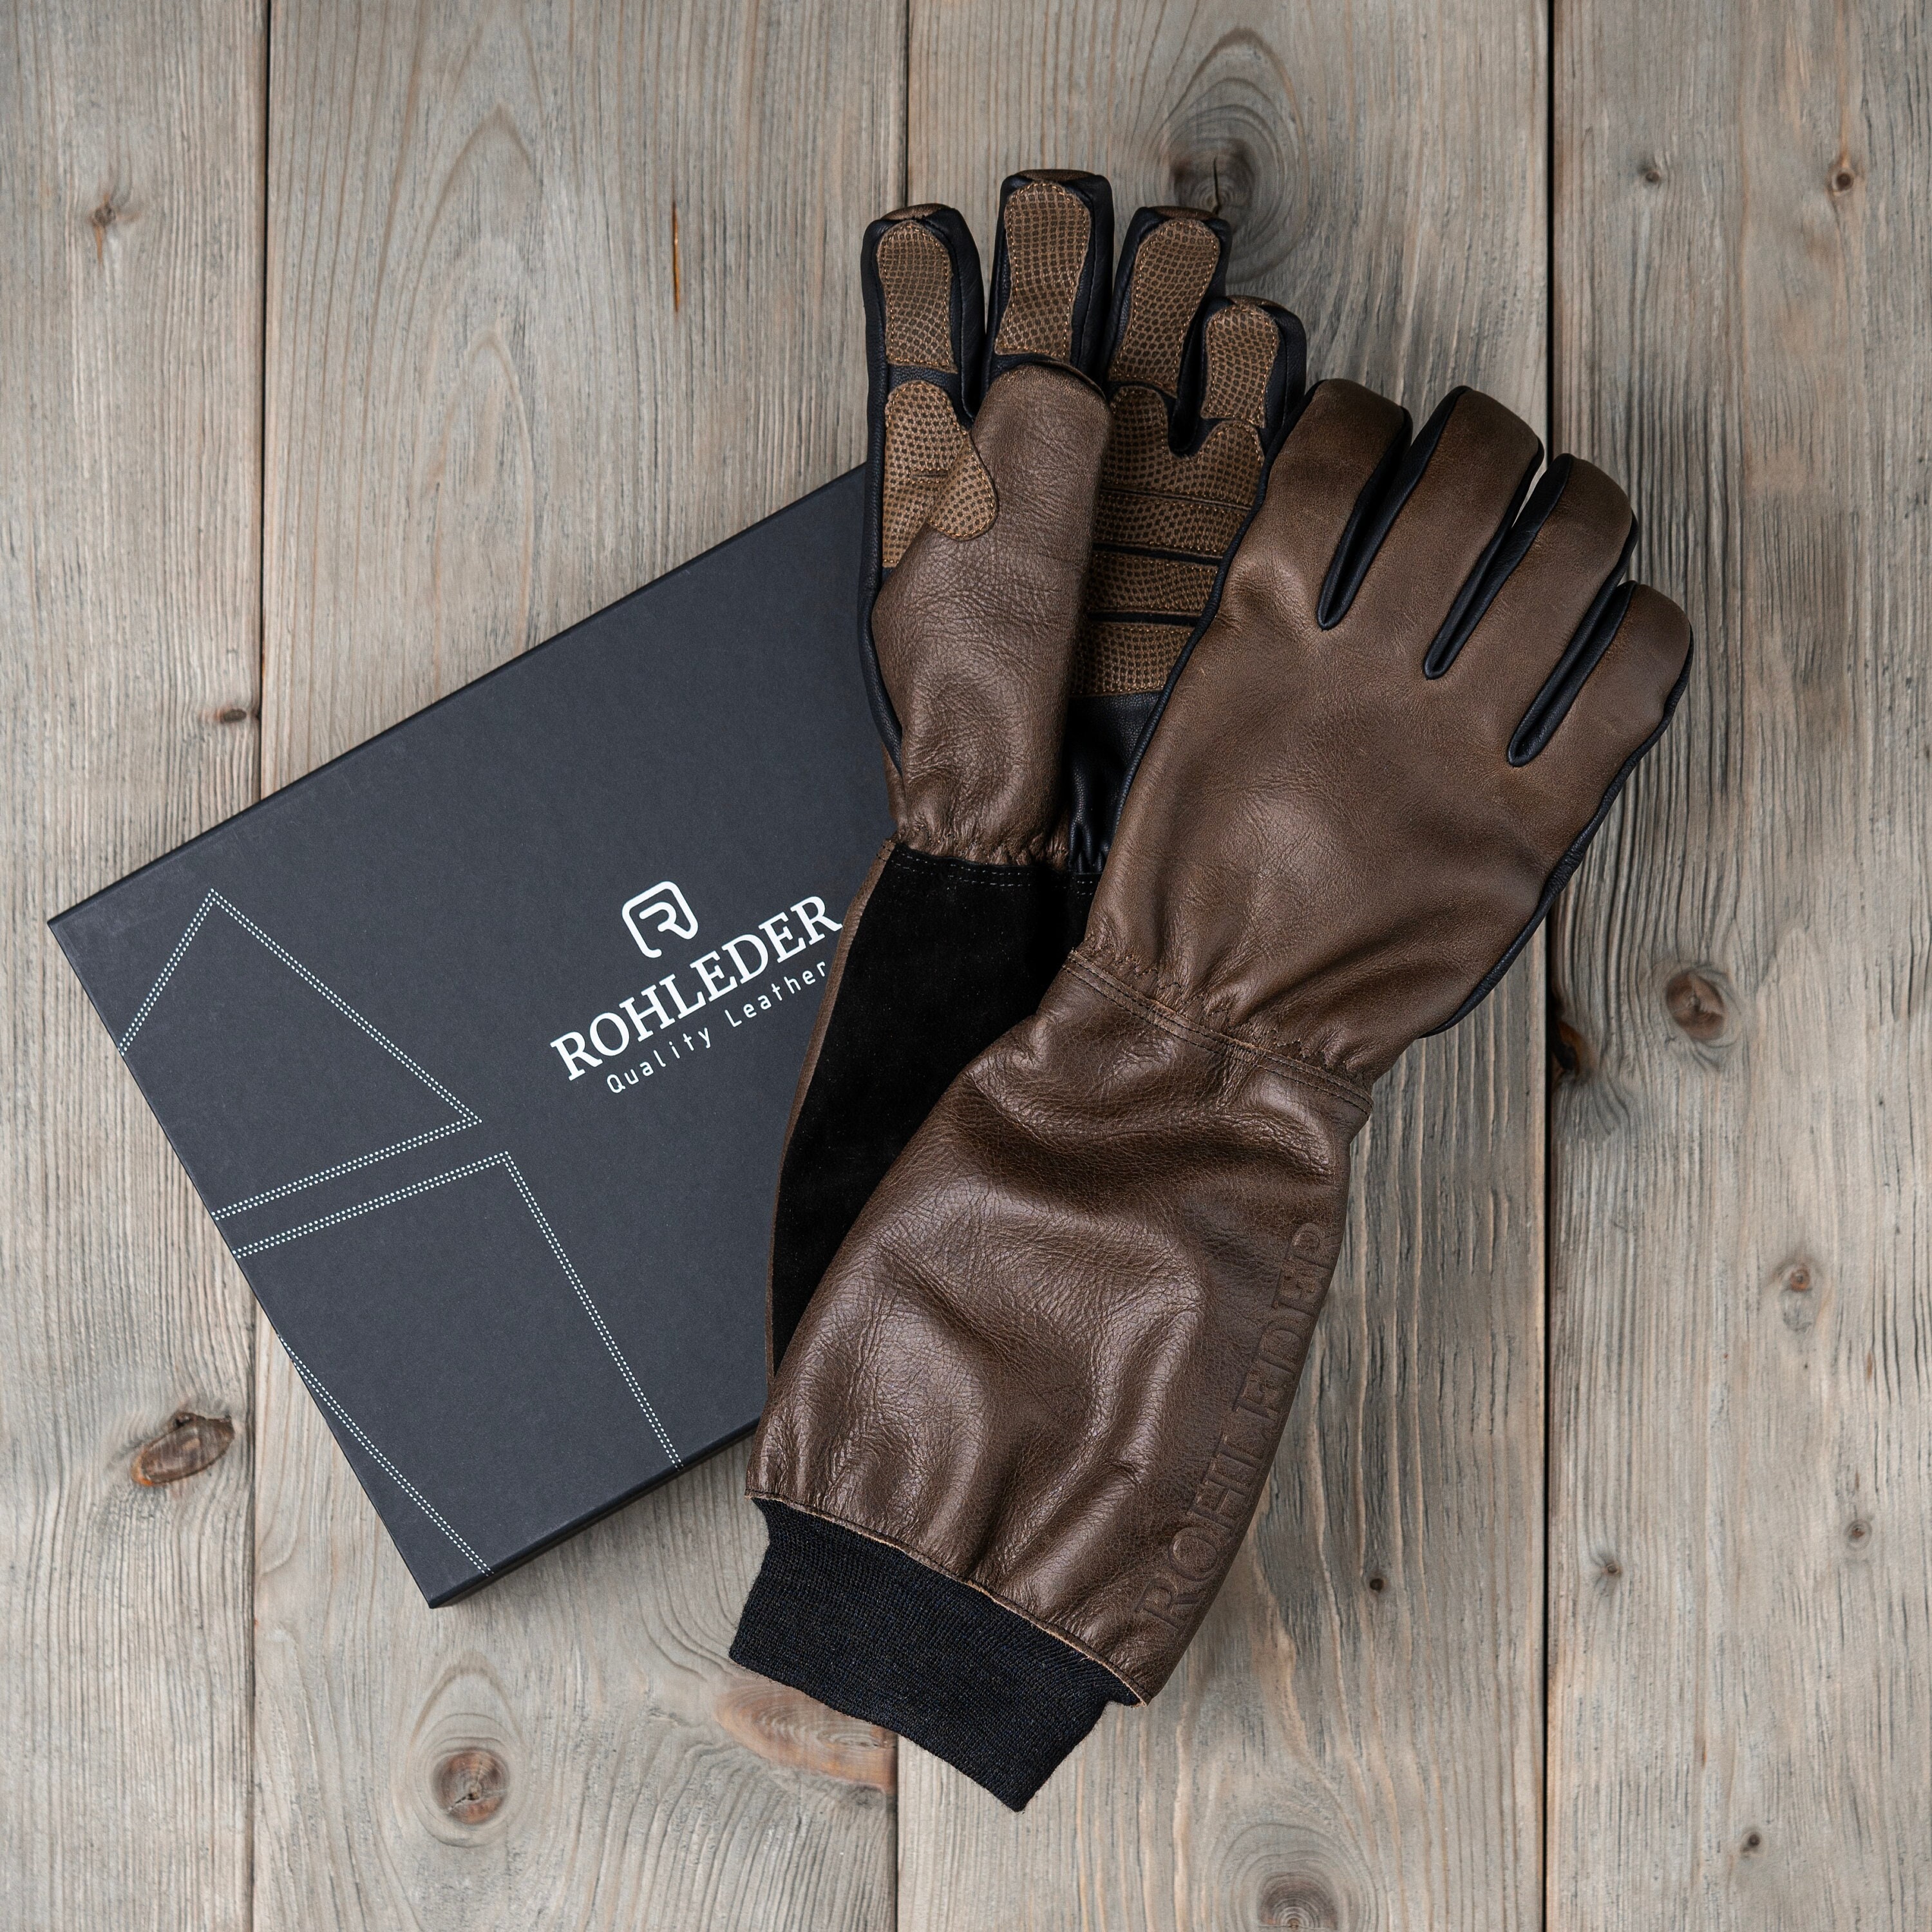 Christmas Gifts for Men Groomsmen Leather Grill Gloves spatula is